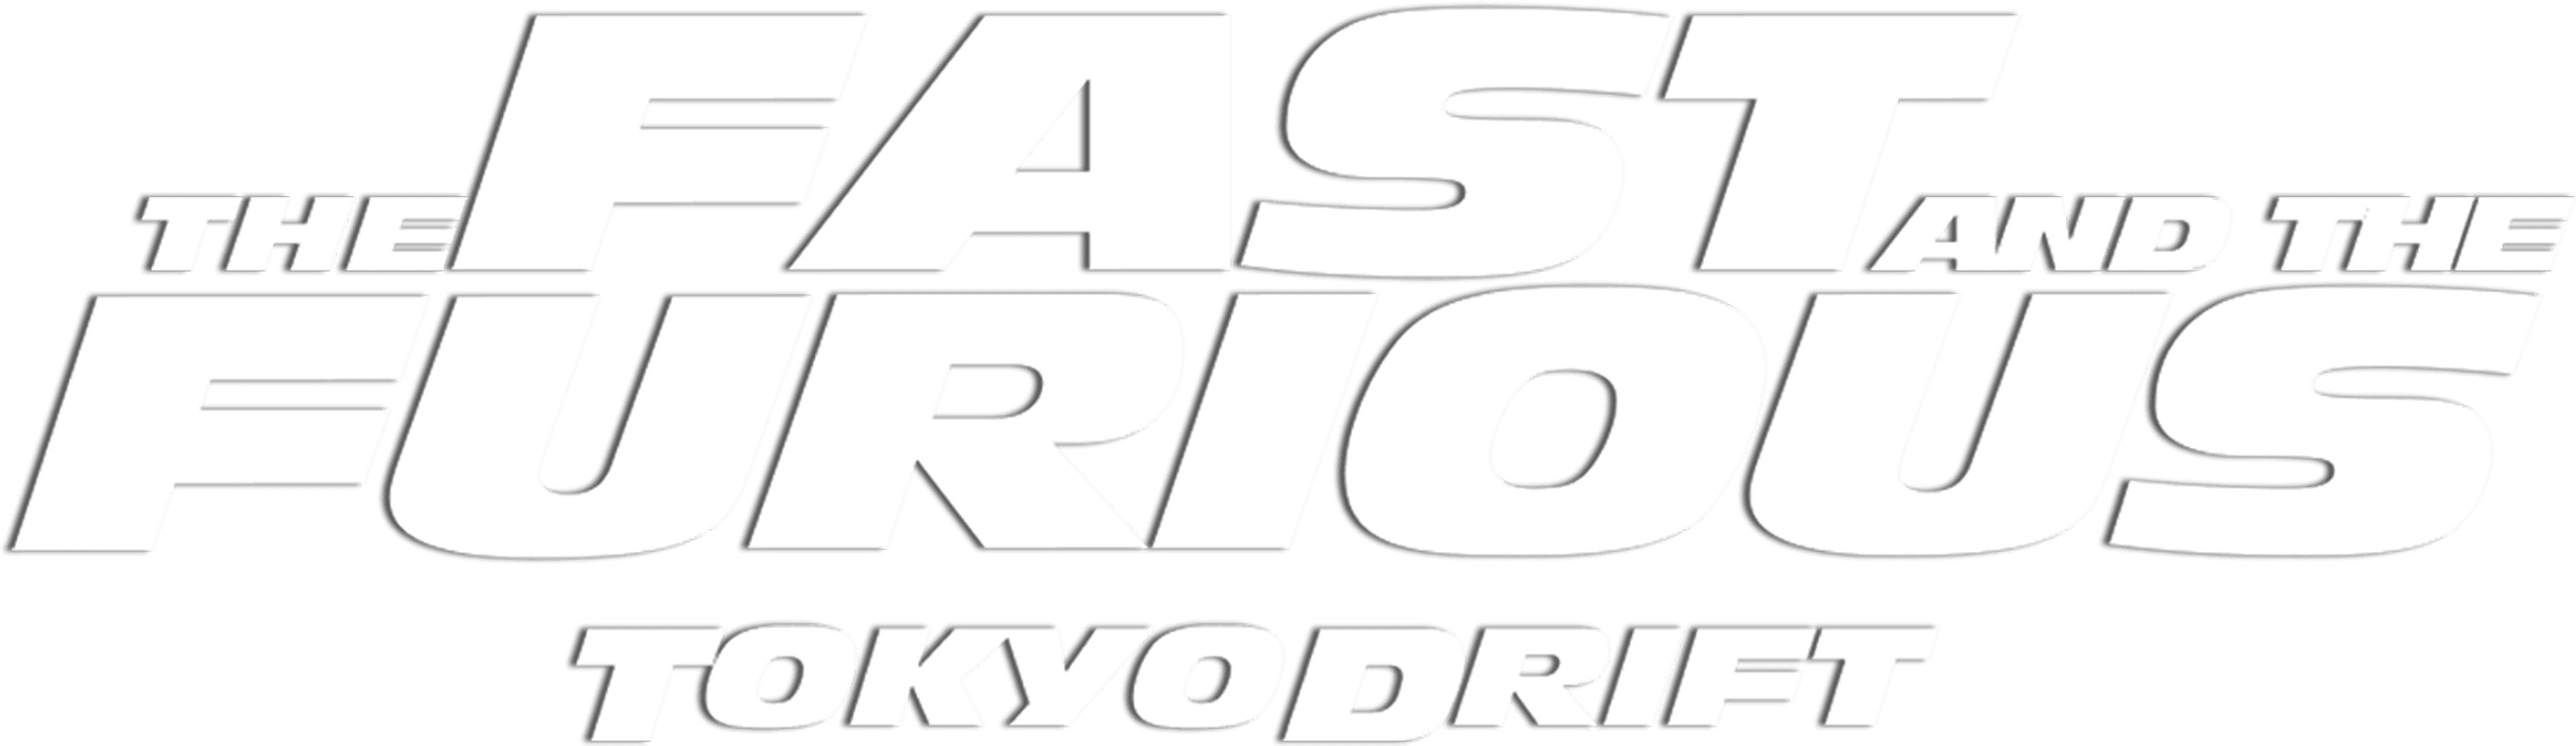 The Fast and the Furious: Tokyo Drift logo